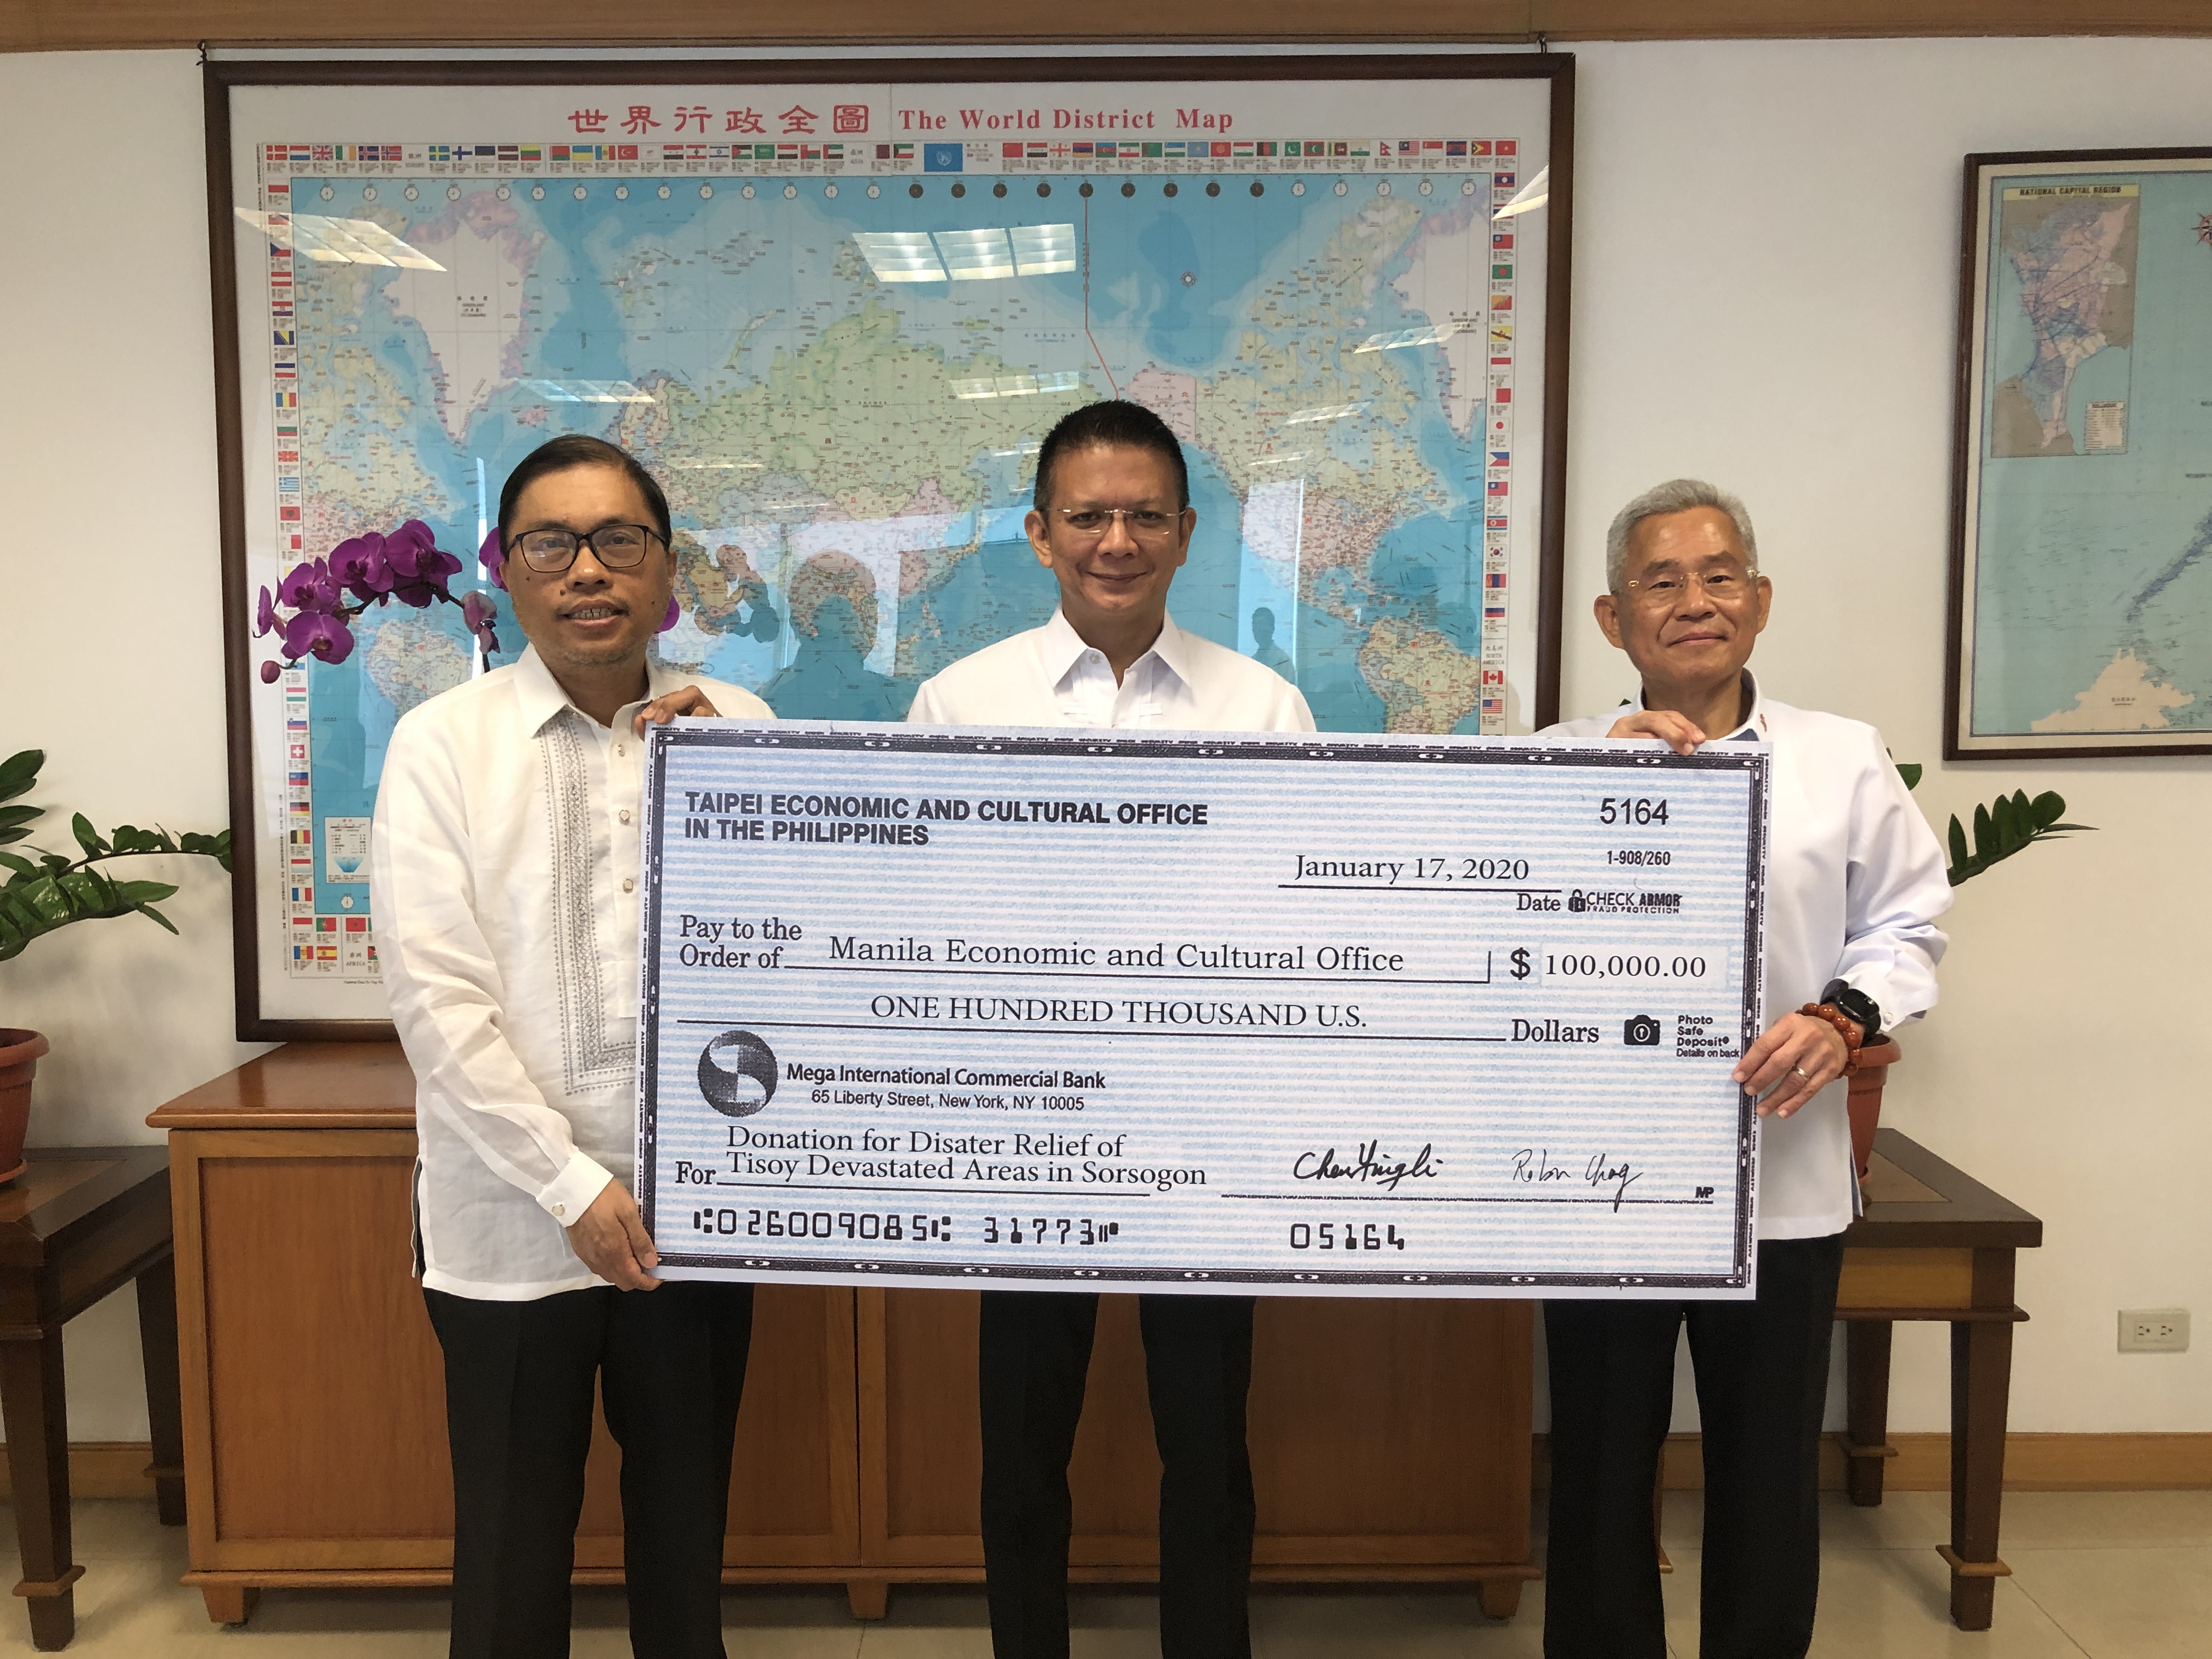 Manila Economic and Cultural Office (MECO) vice chairman Gilberto Lauengco and Sorsogon gov. Francis "Chiz" Escudero receive a $100,000 check for the victims of Typhoon Tisoy, from Taipei Economic and Cultural Office (TECO), represented by Michael Peiyung Hsu, at the TECO office in Makati.